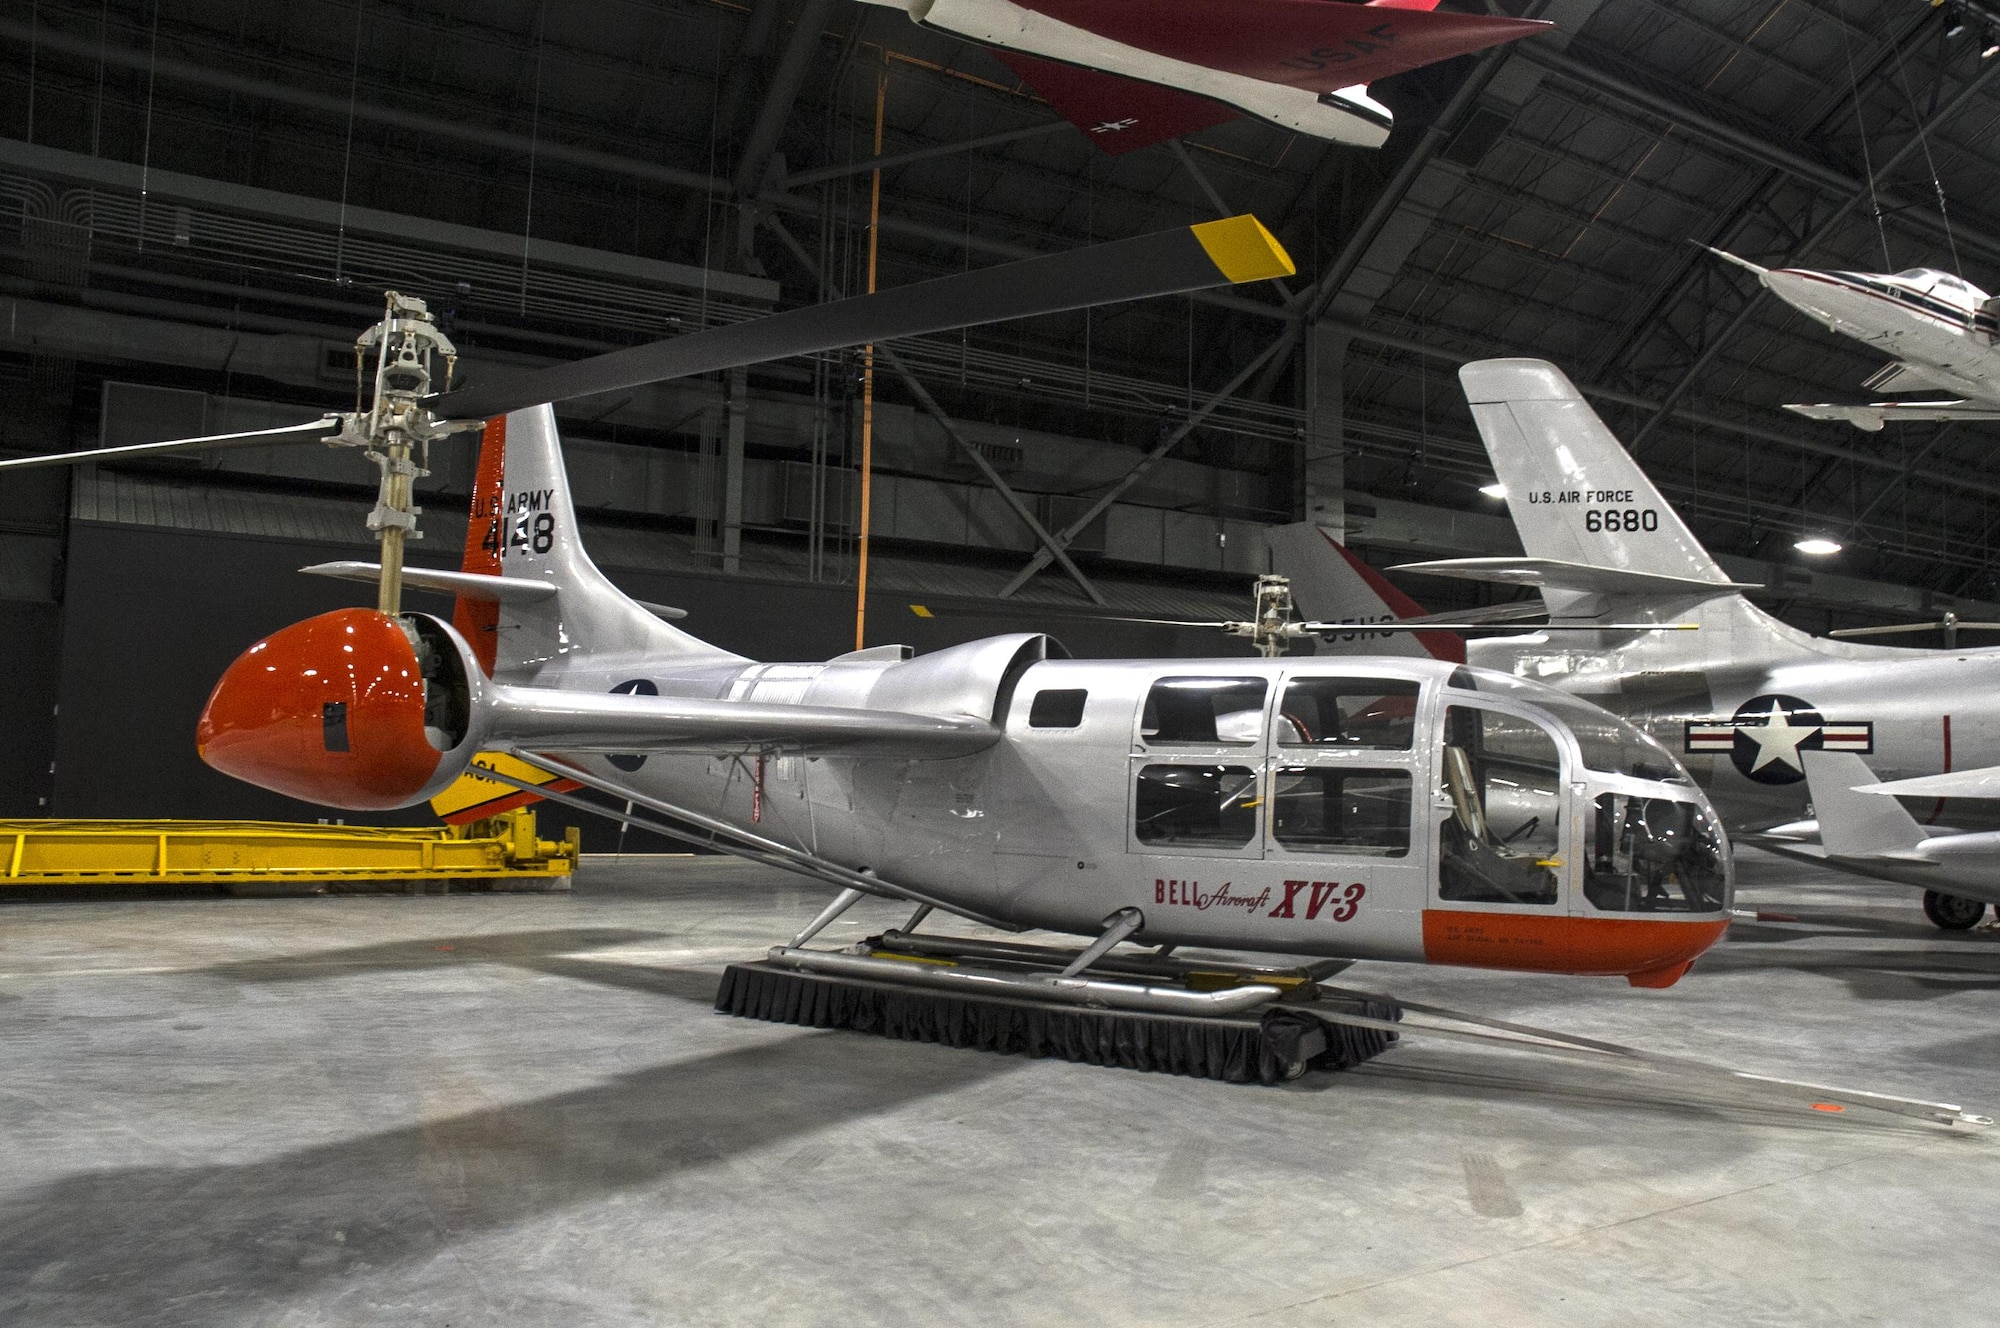 Bell Helicopter Textron XV-3 in the R&D Gallery at the National Museum of the U.S. Air Force on December 28, 2015. (U.S. Air Force photo)